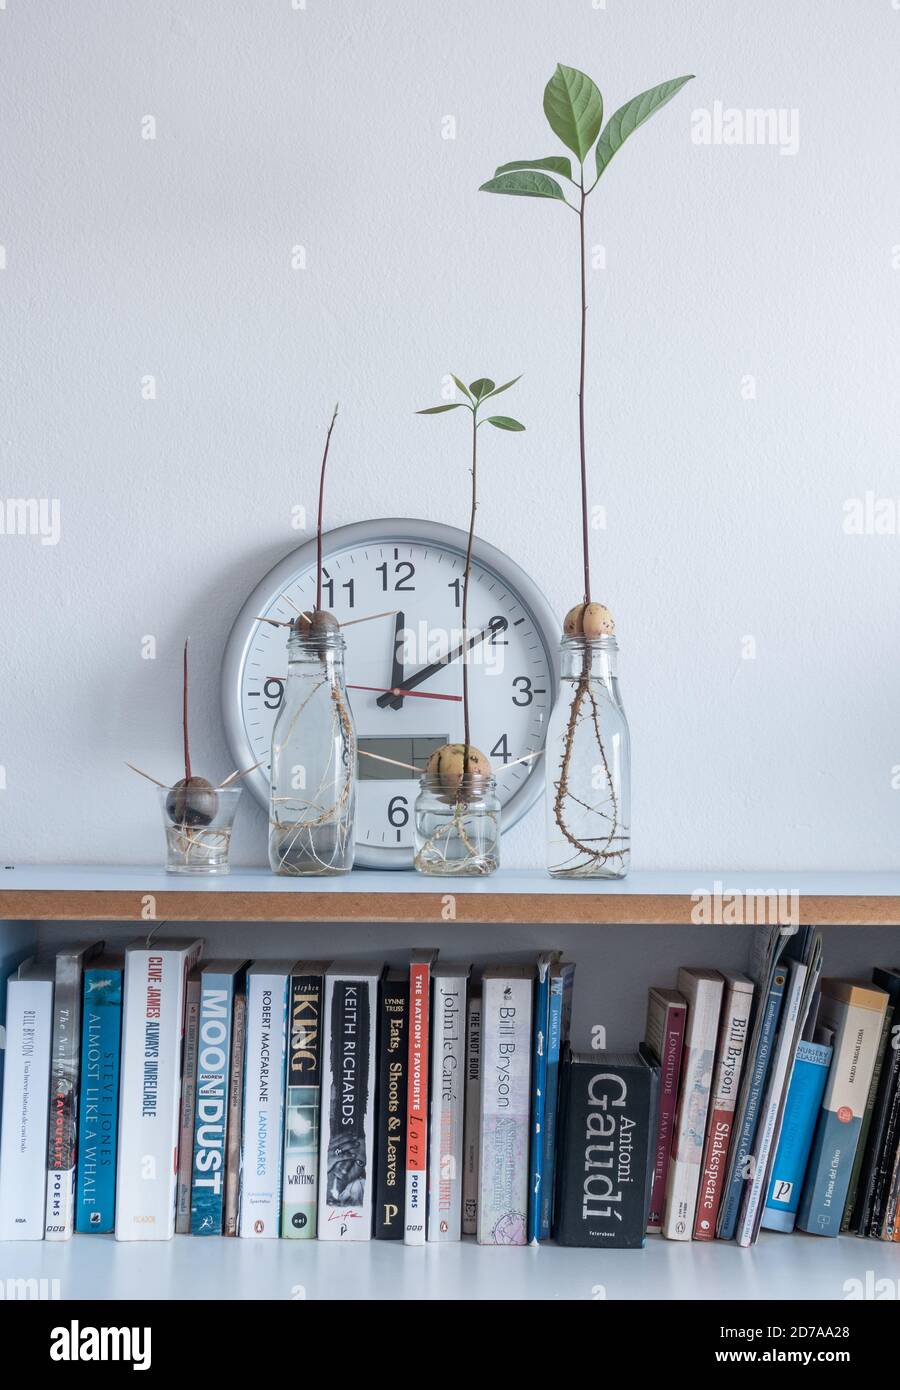 Image showing clock and Avocado seed/stone growing in water on home shelf. Sustainable living, sustainable lifestyle concept Stock Photo